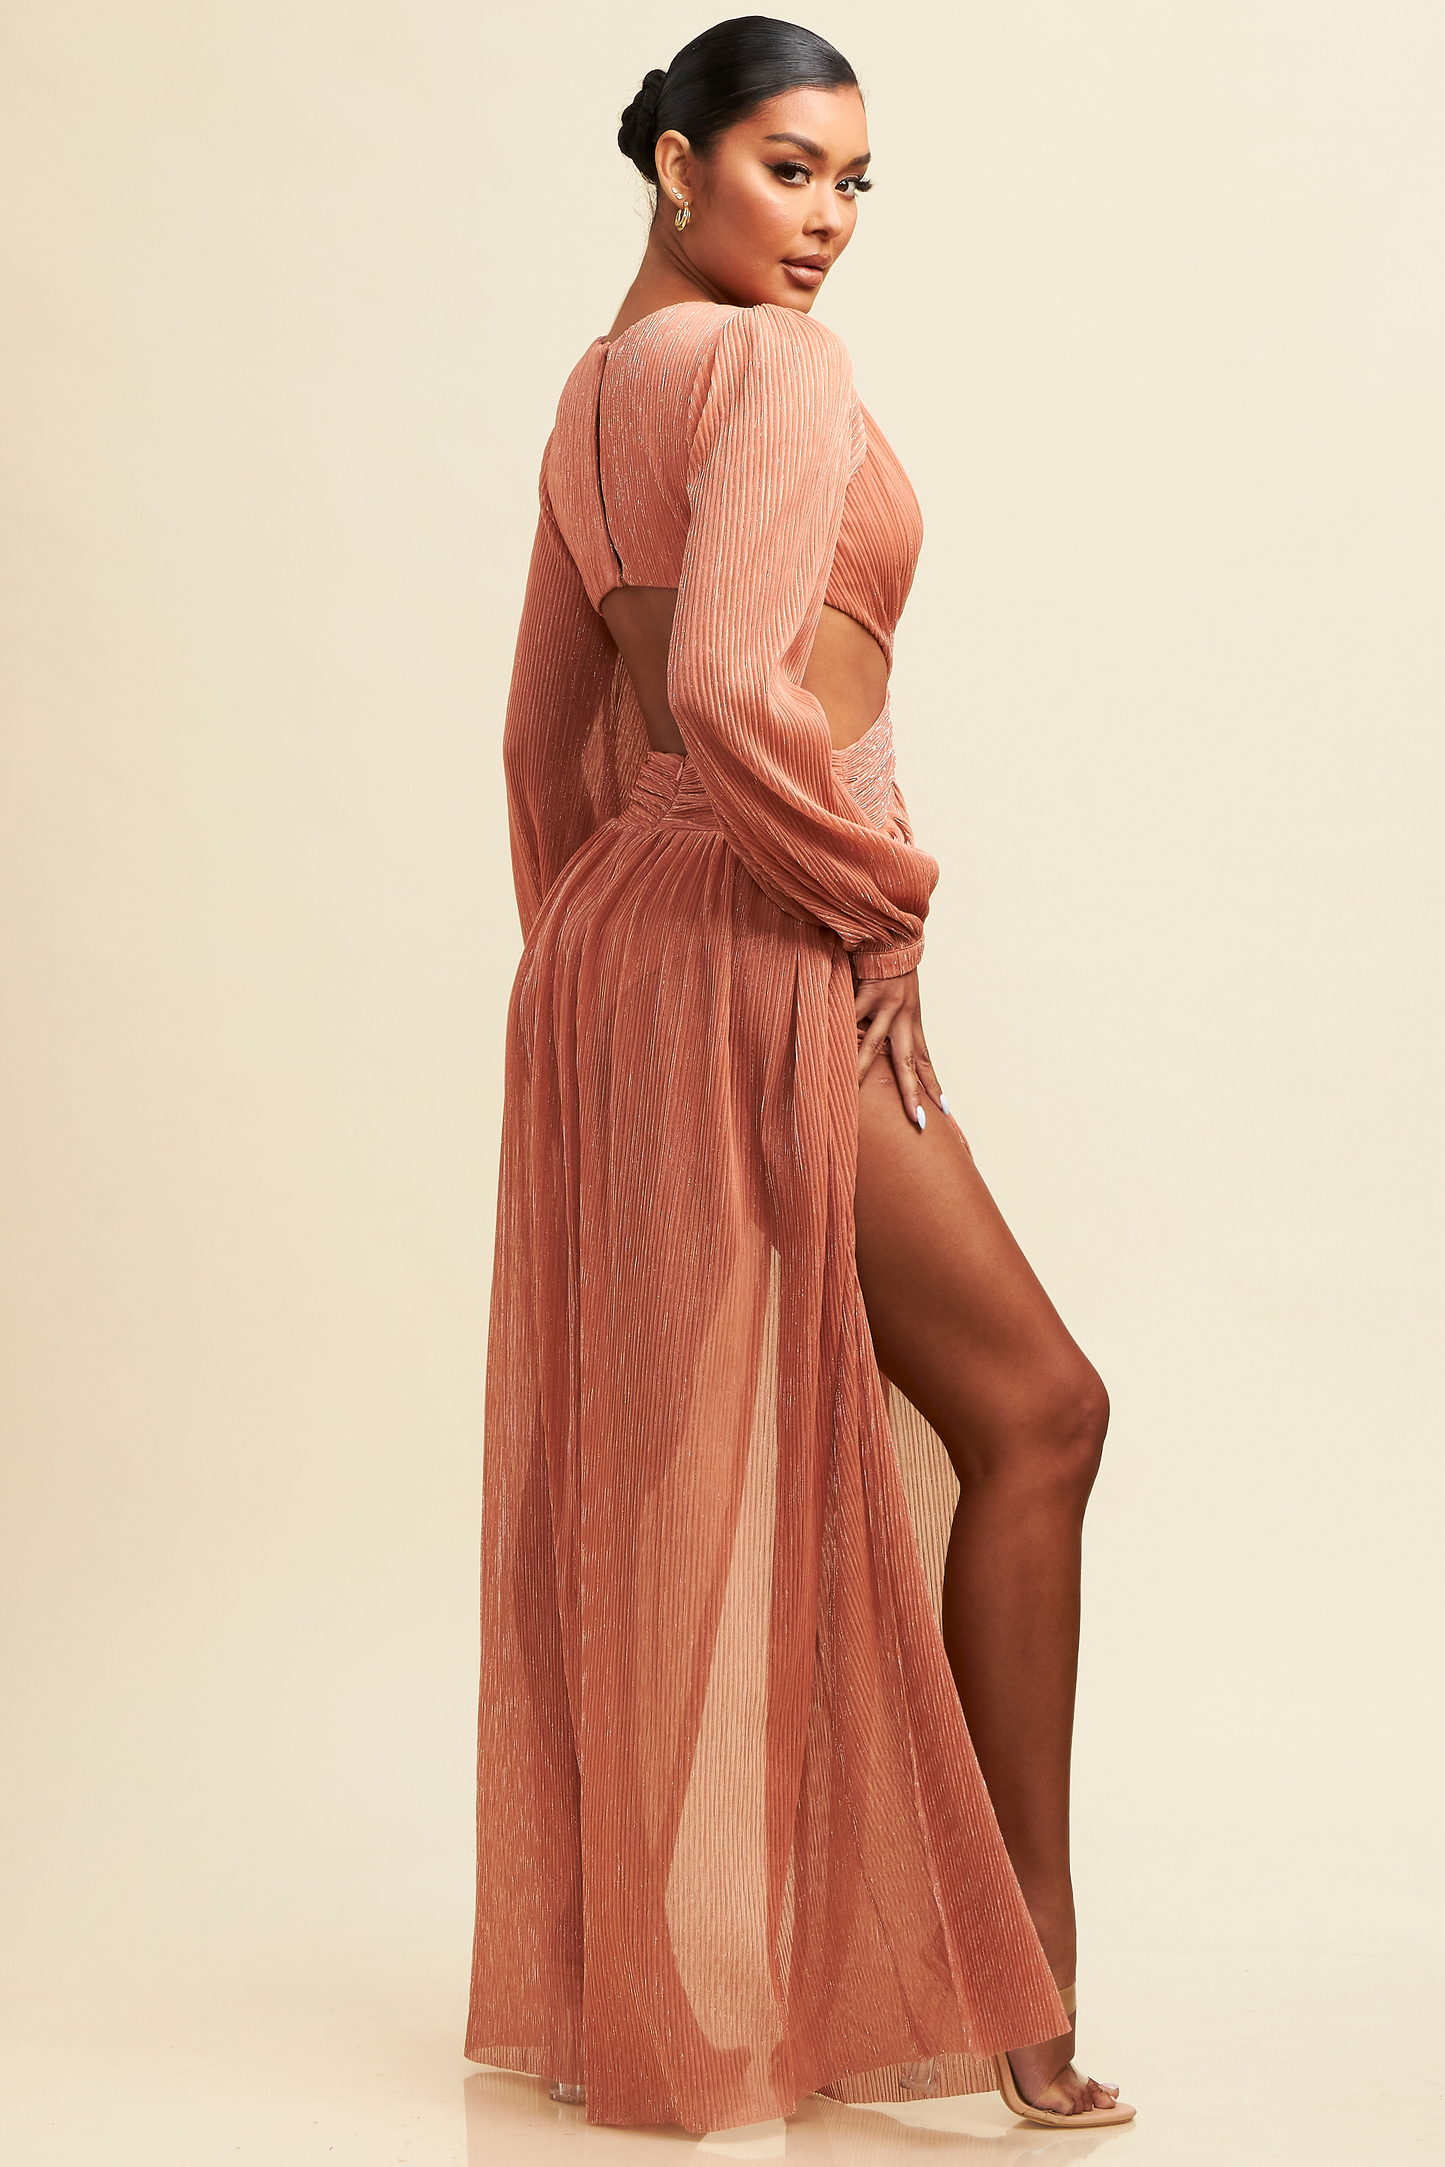 Elegant Peach V-Neck Ruffle Cut-Out Open Back Maxi Dress with Long Sleeve